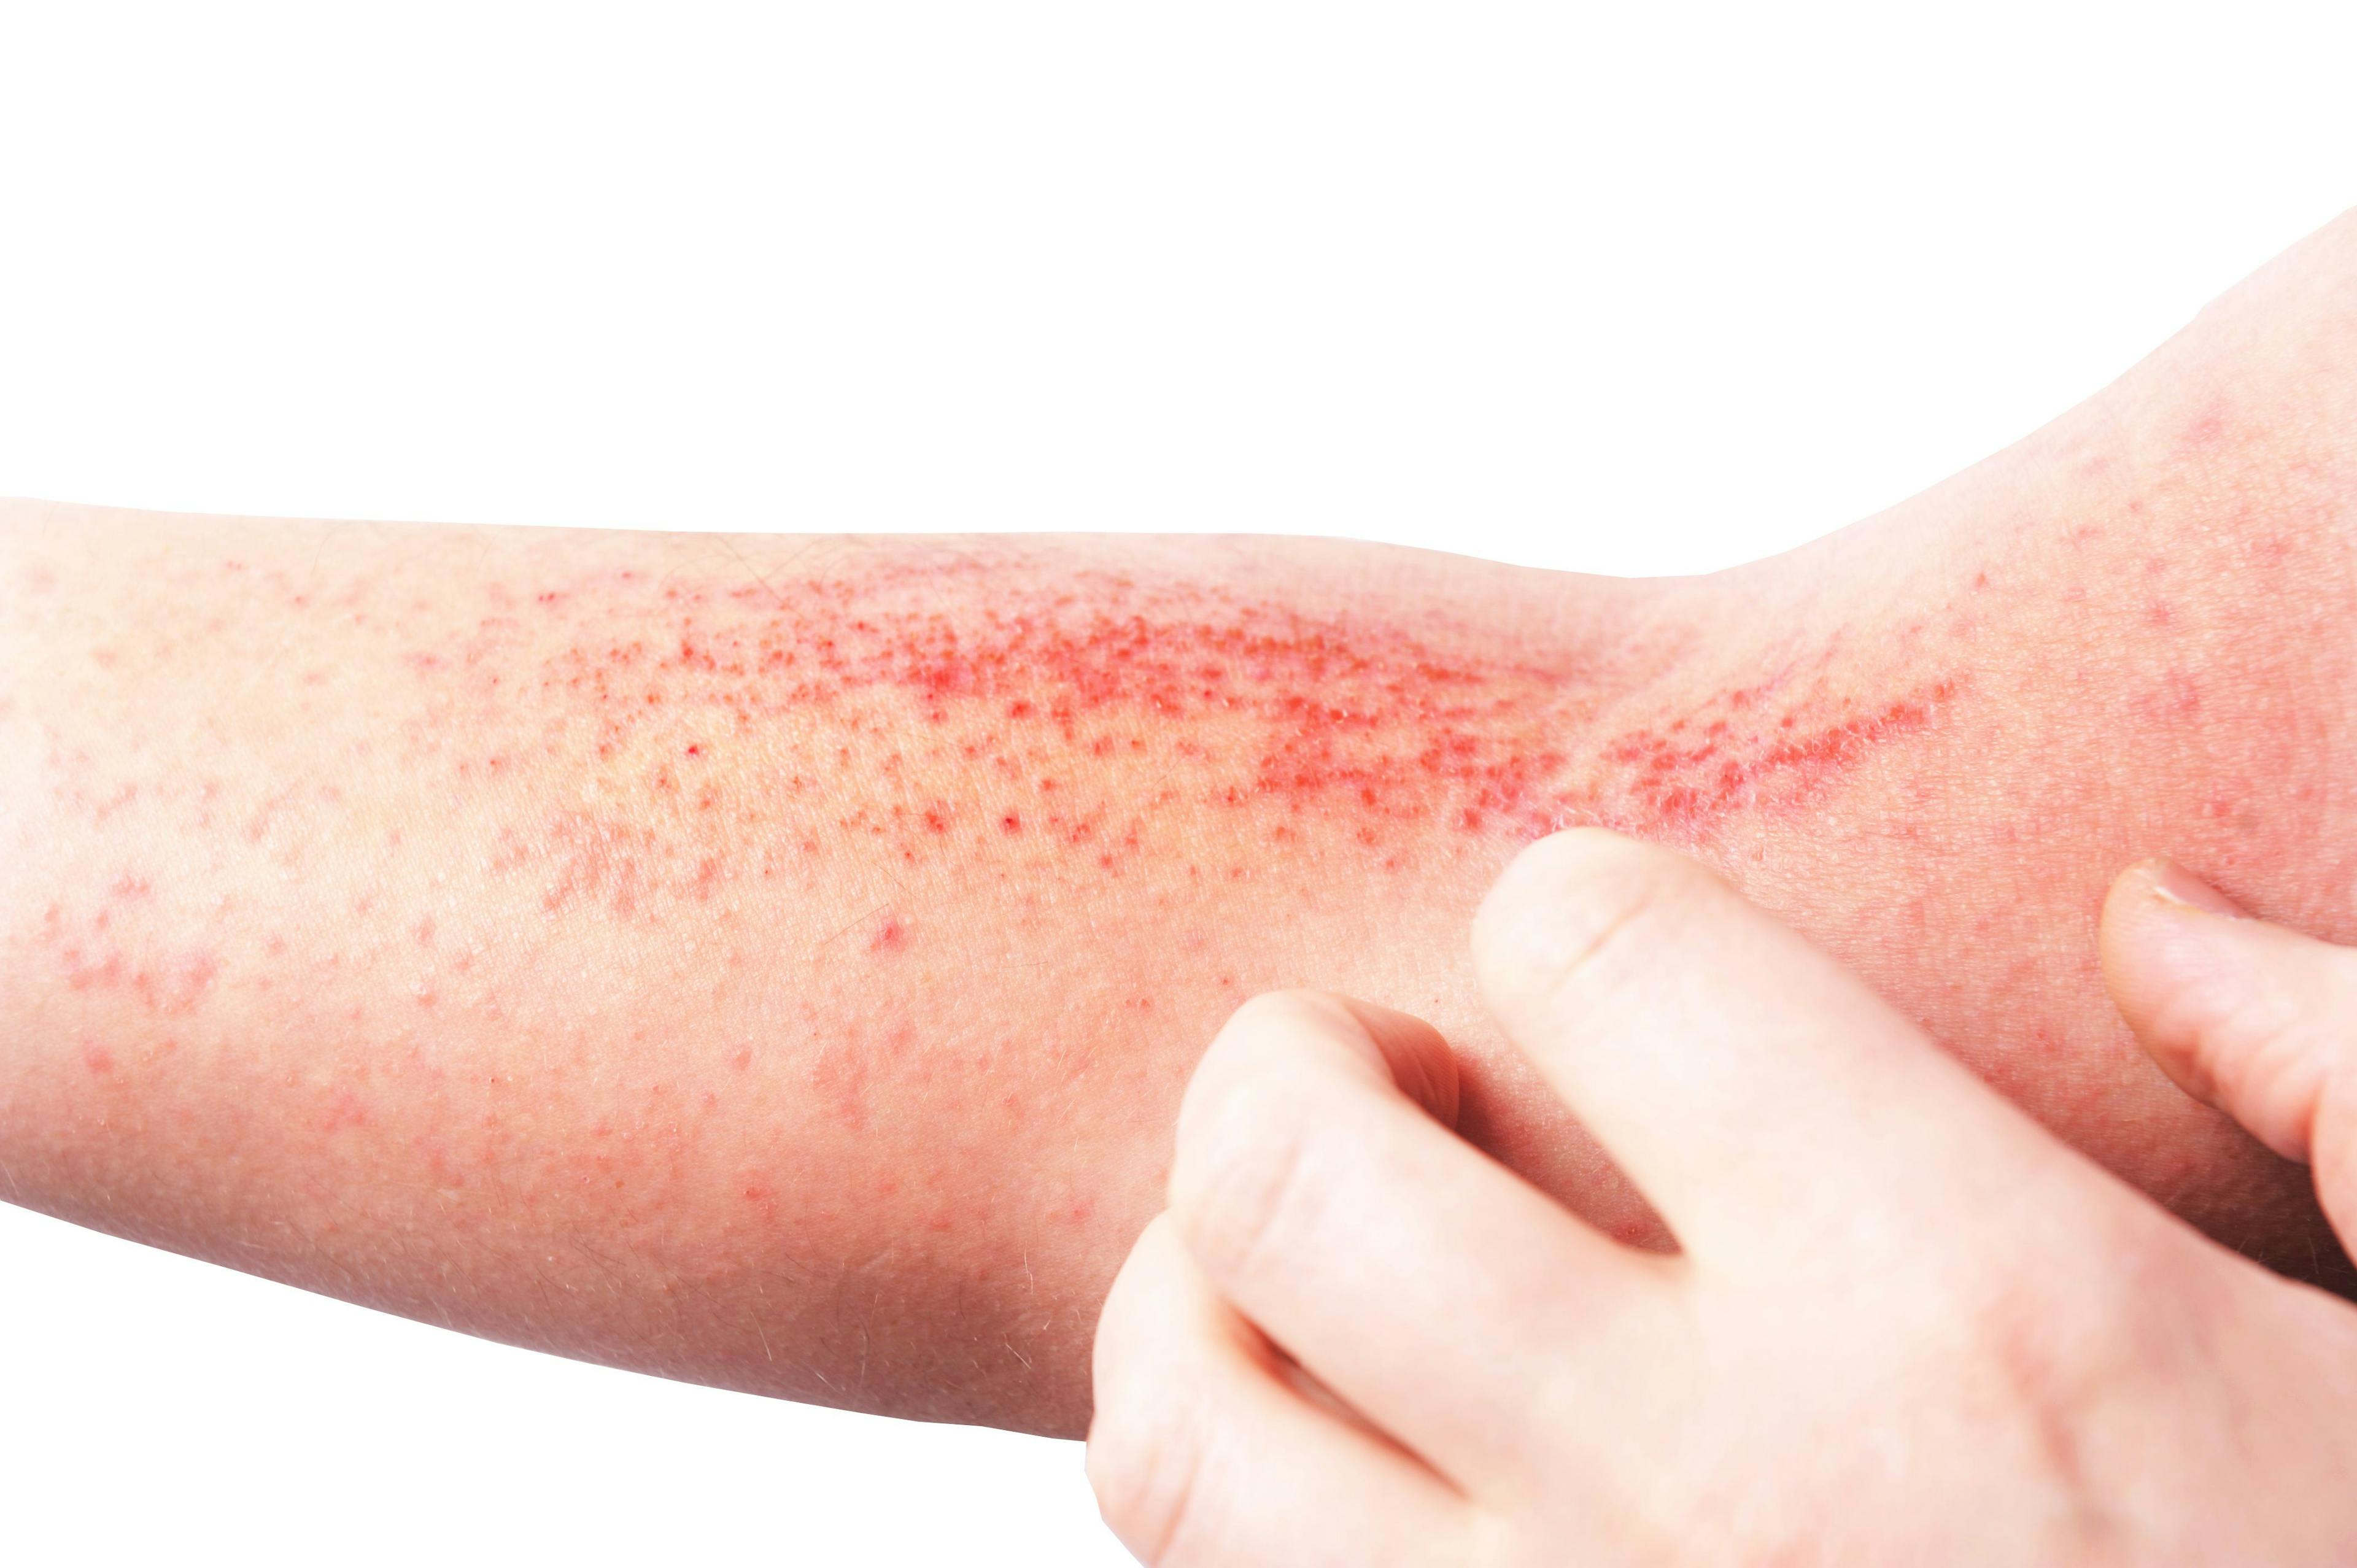 Atopic dermatitis (AD), also known as atopic eczema, is a type of inflammation of the skin (dermatitis) | Image Credit: lial88 - stock.adobe.com